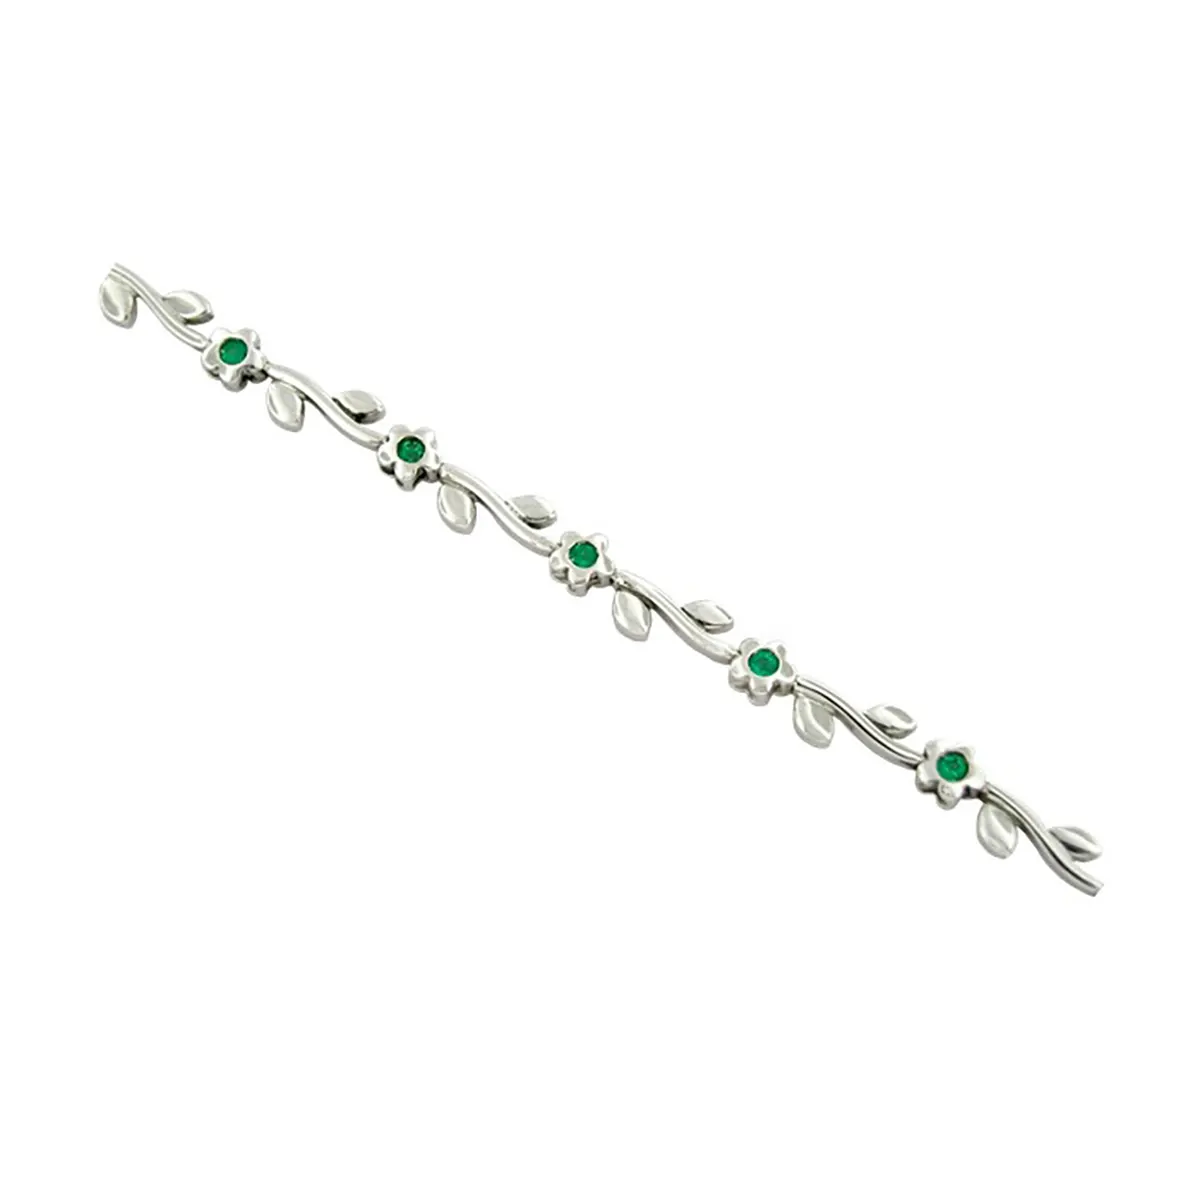 Tennis Bracelet With Emerald Stone In White Gold - 5mm – Drip Project